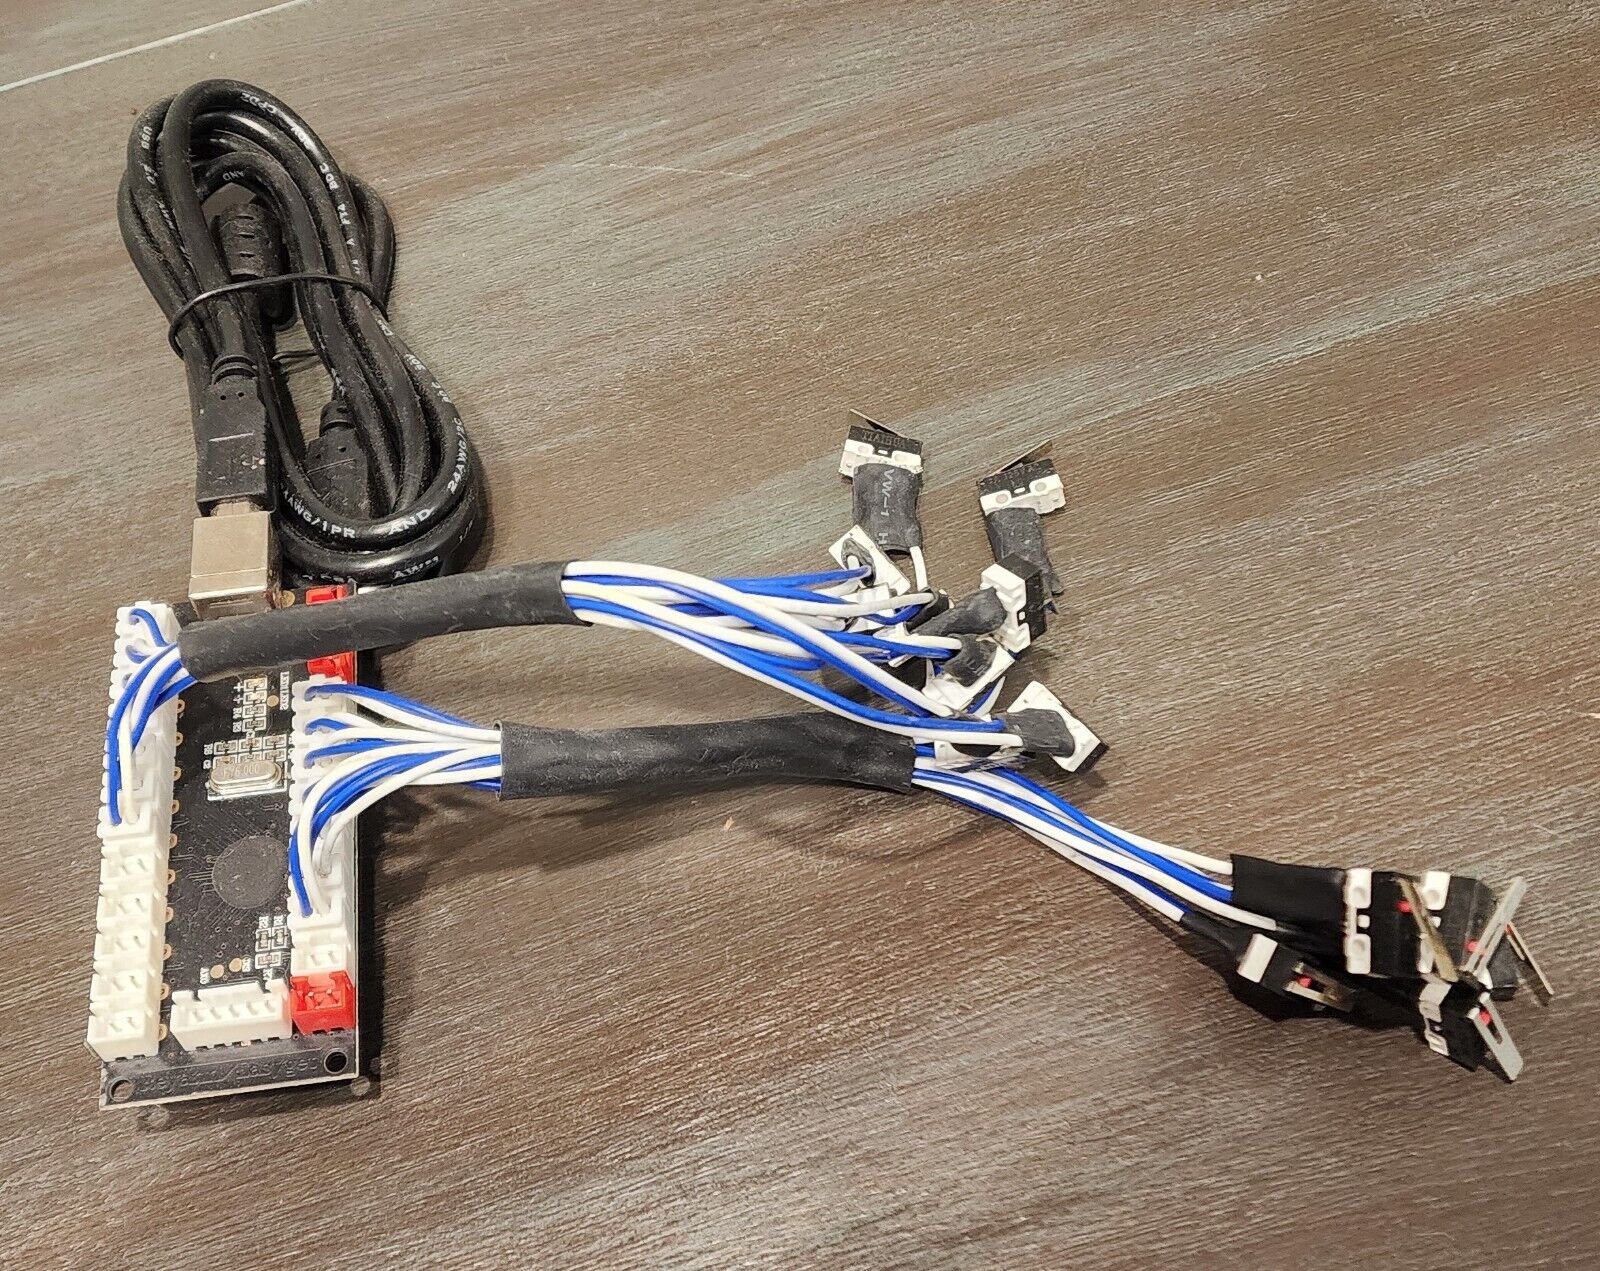 Zero Delay USB Encoder with switches and USB cables